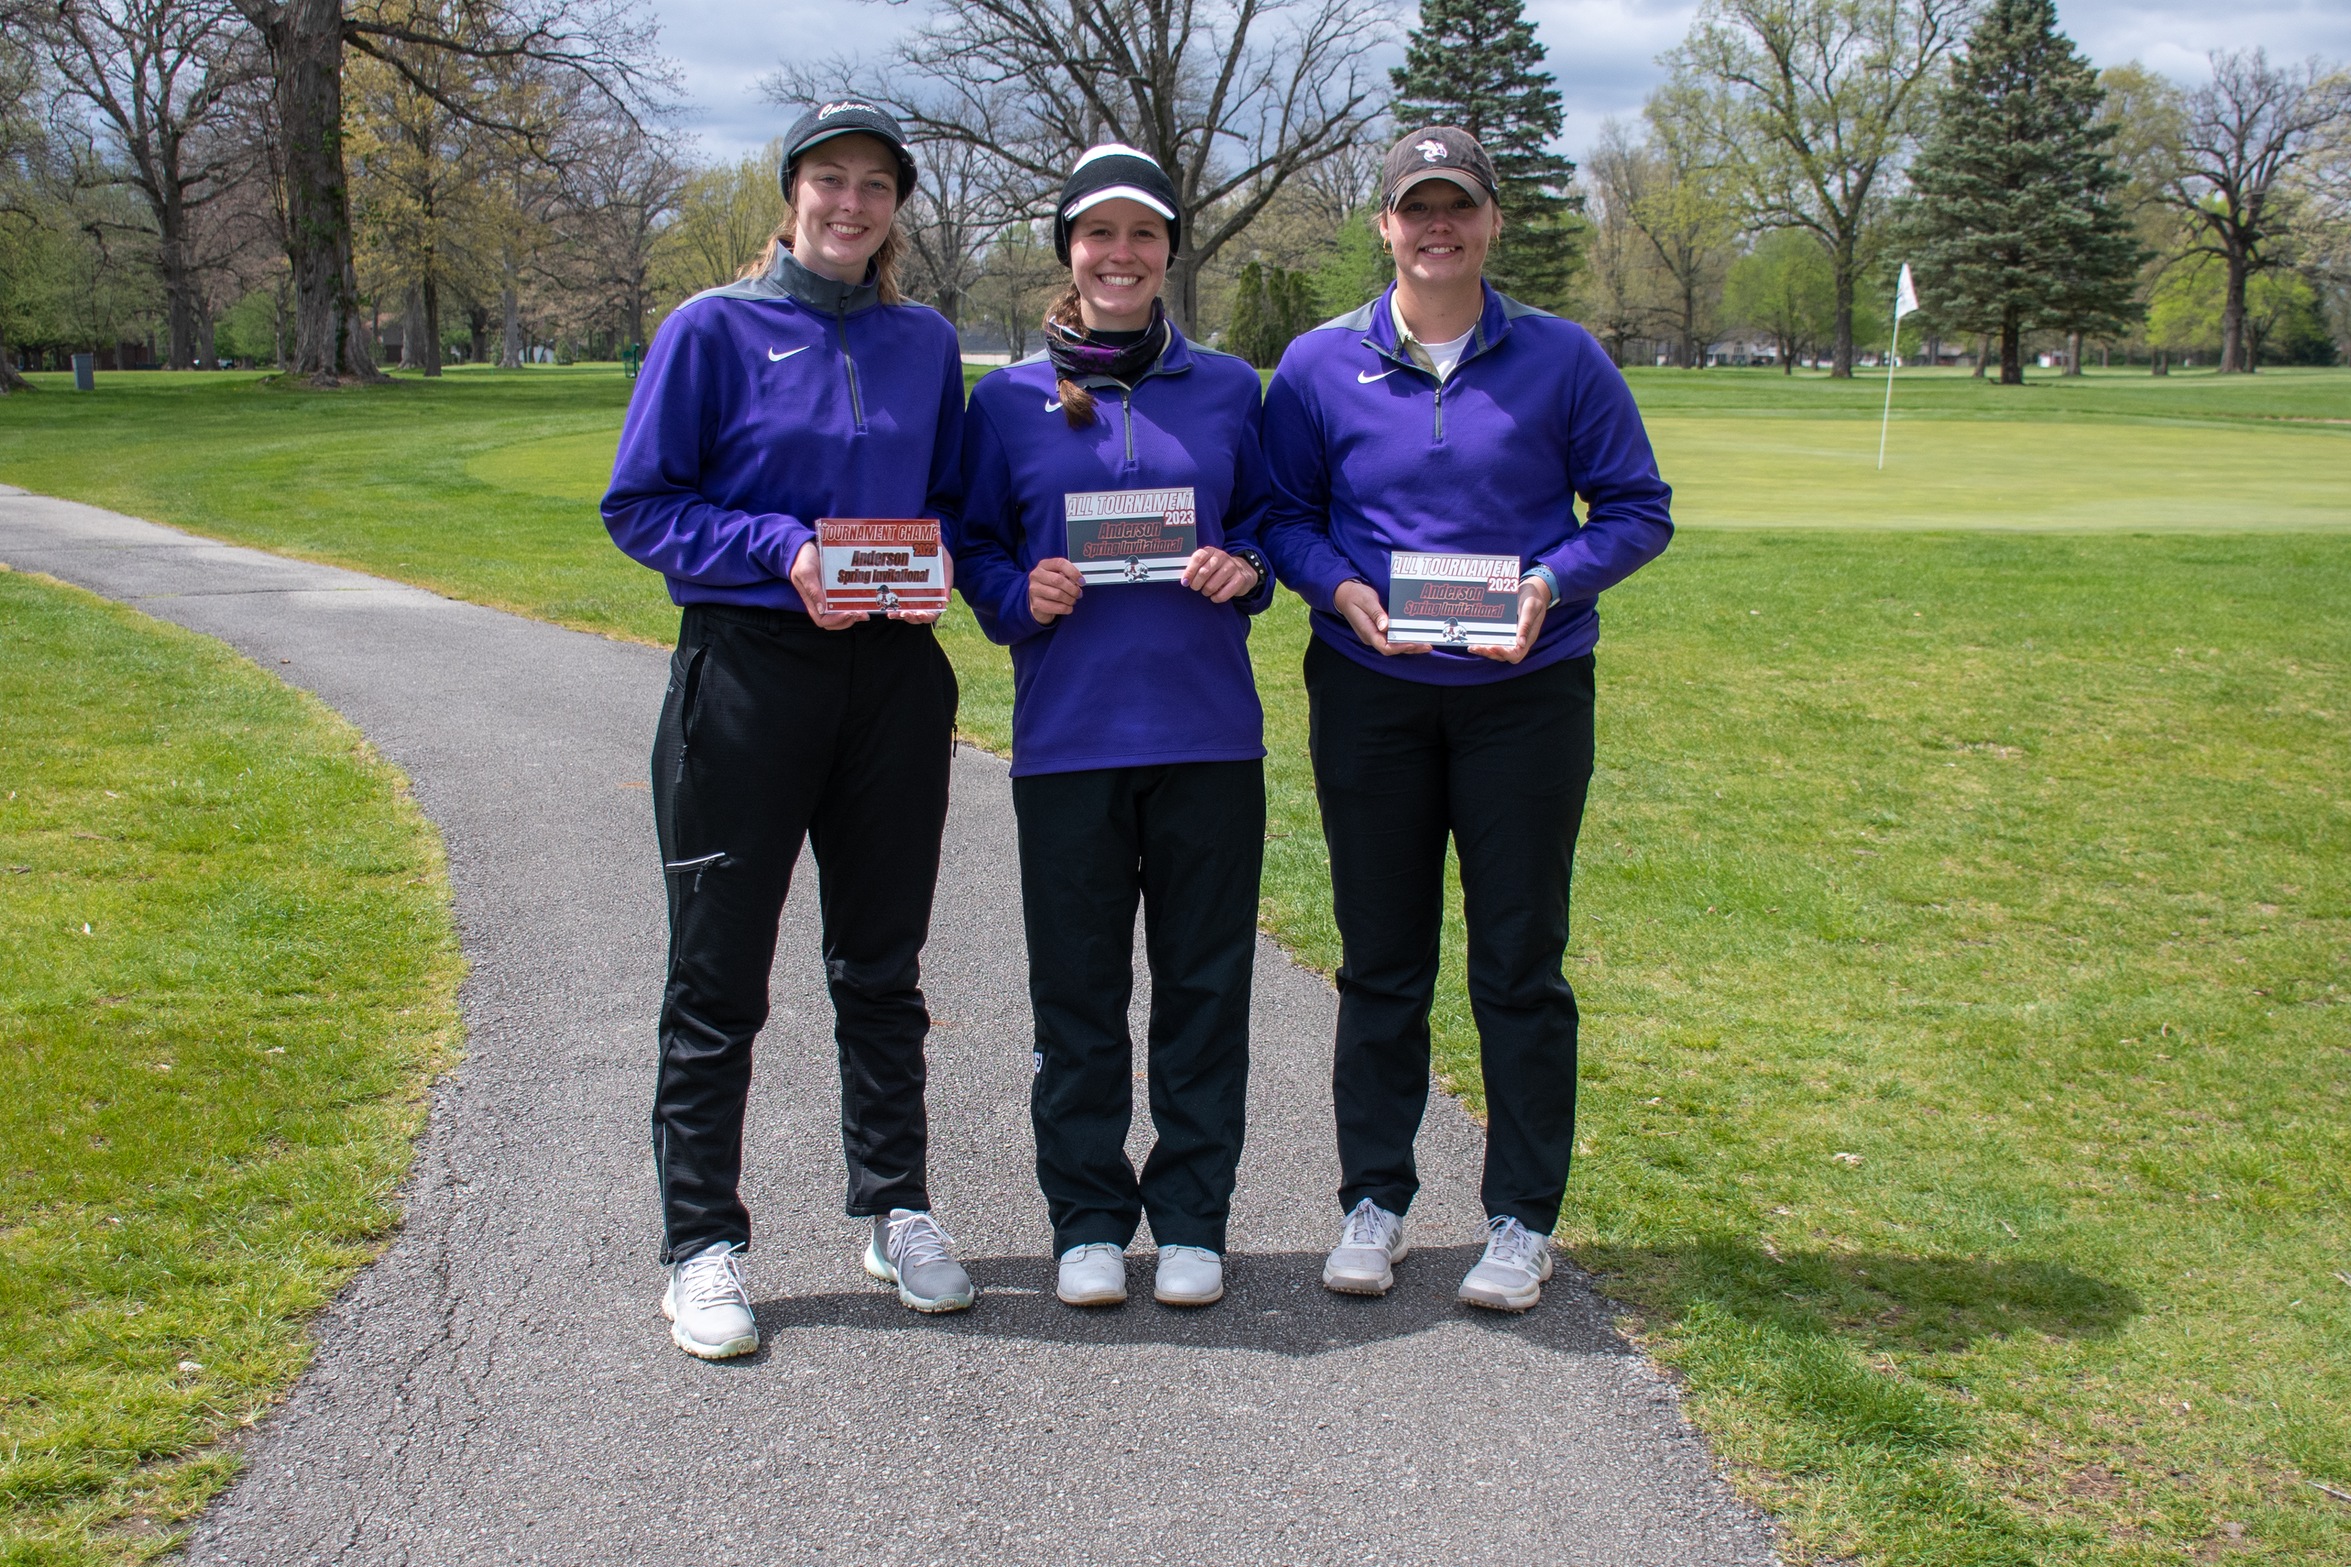 Van Dyke victorious in match play at Anderson Spring Invitational